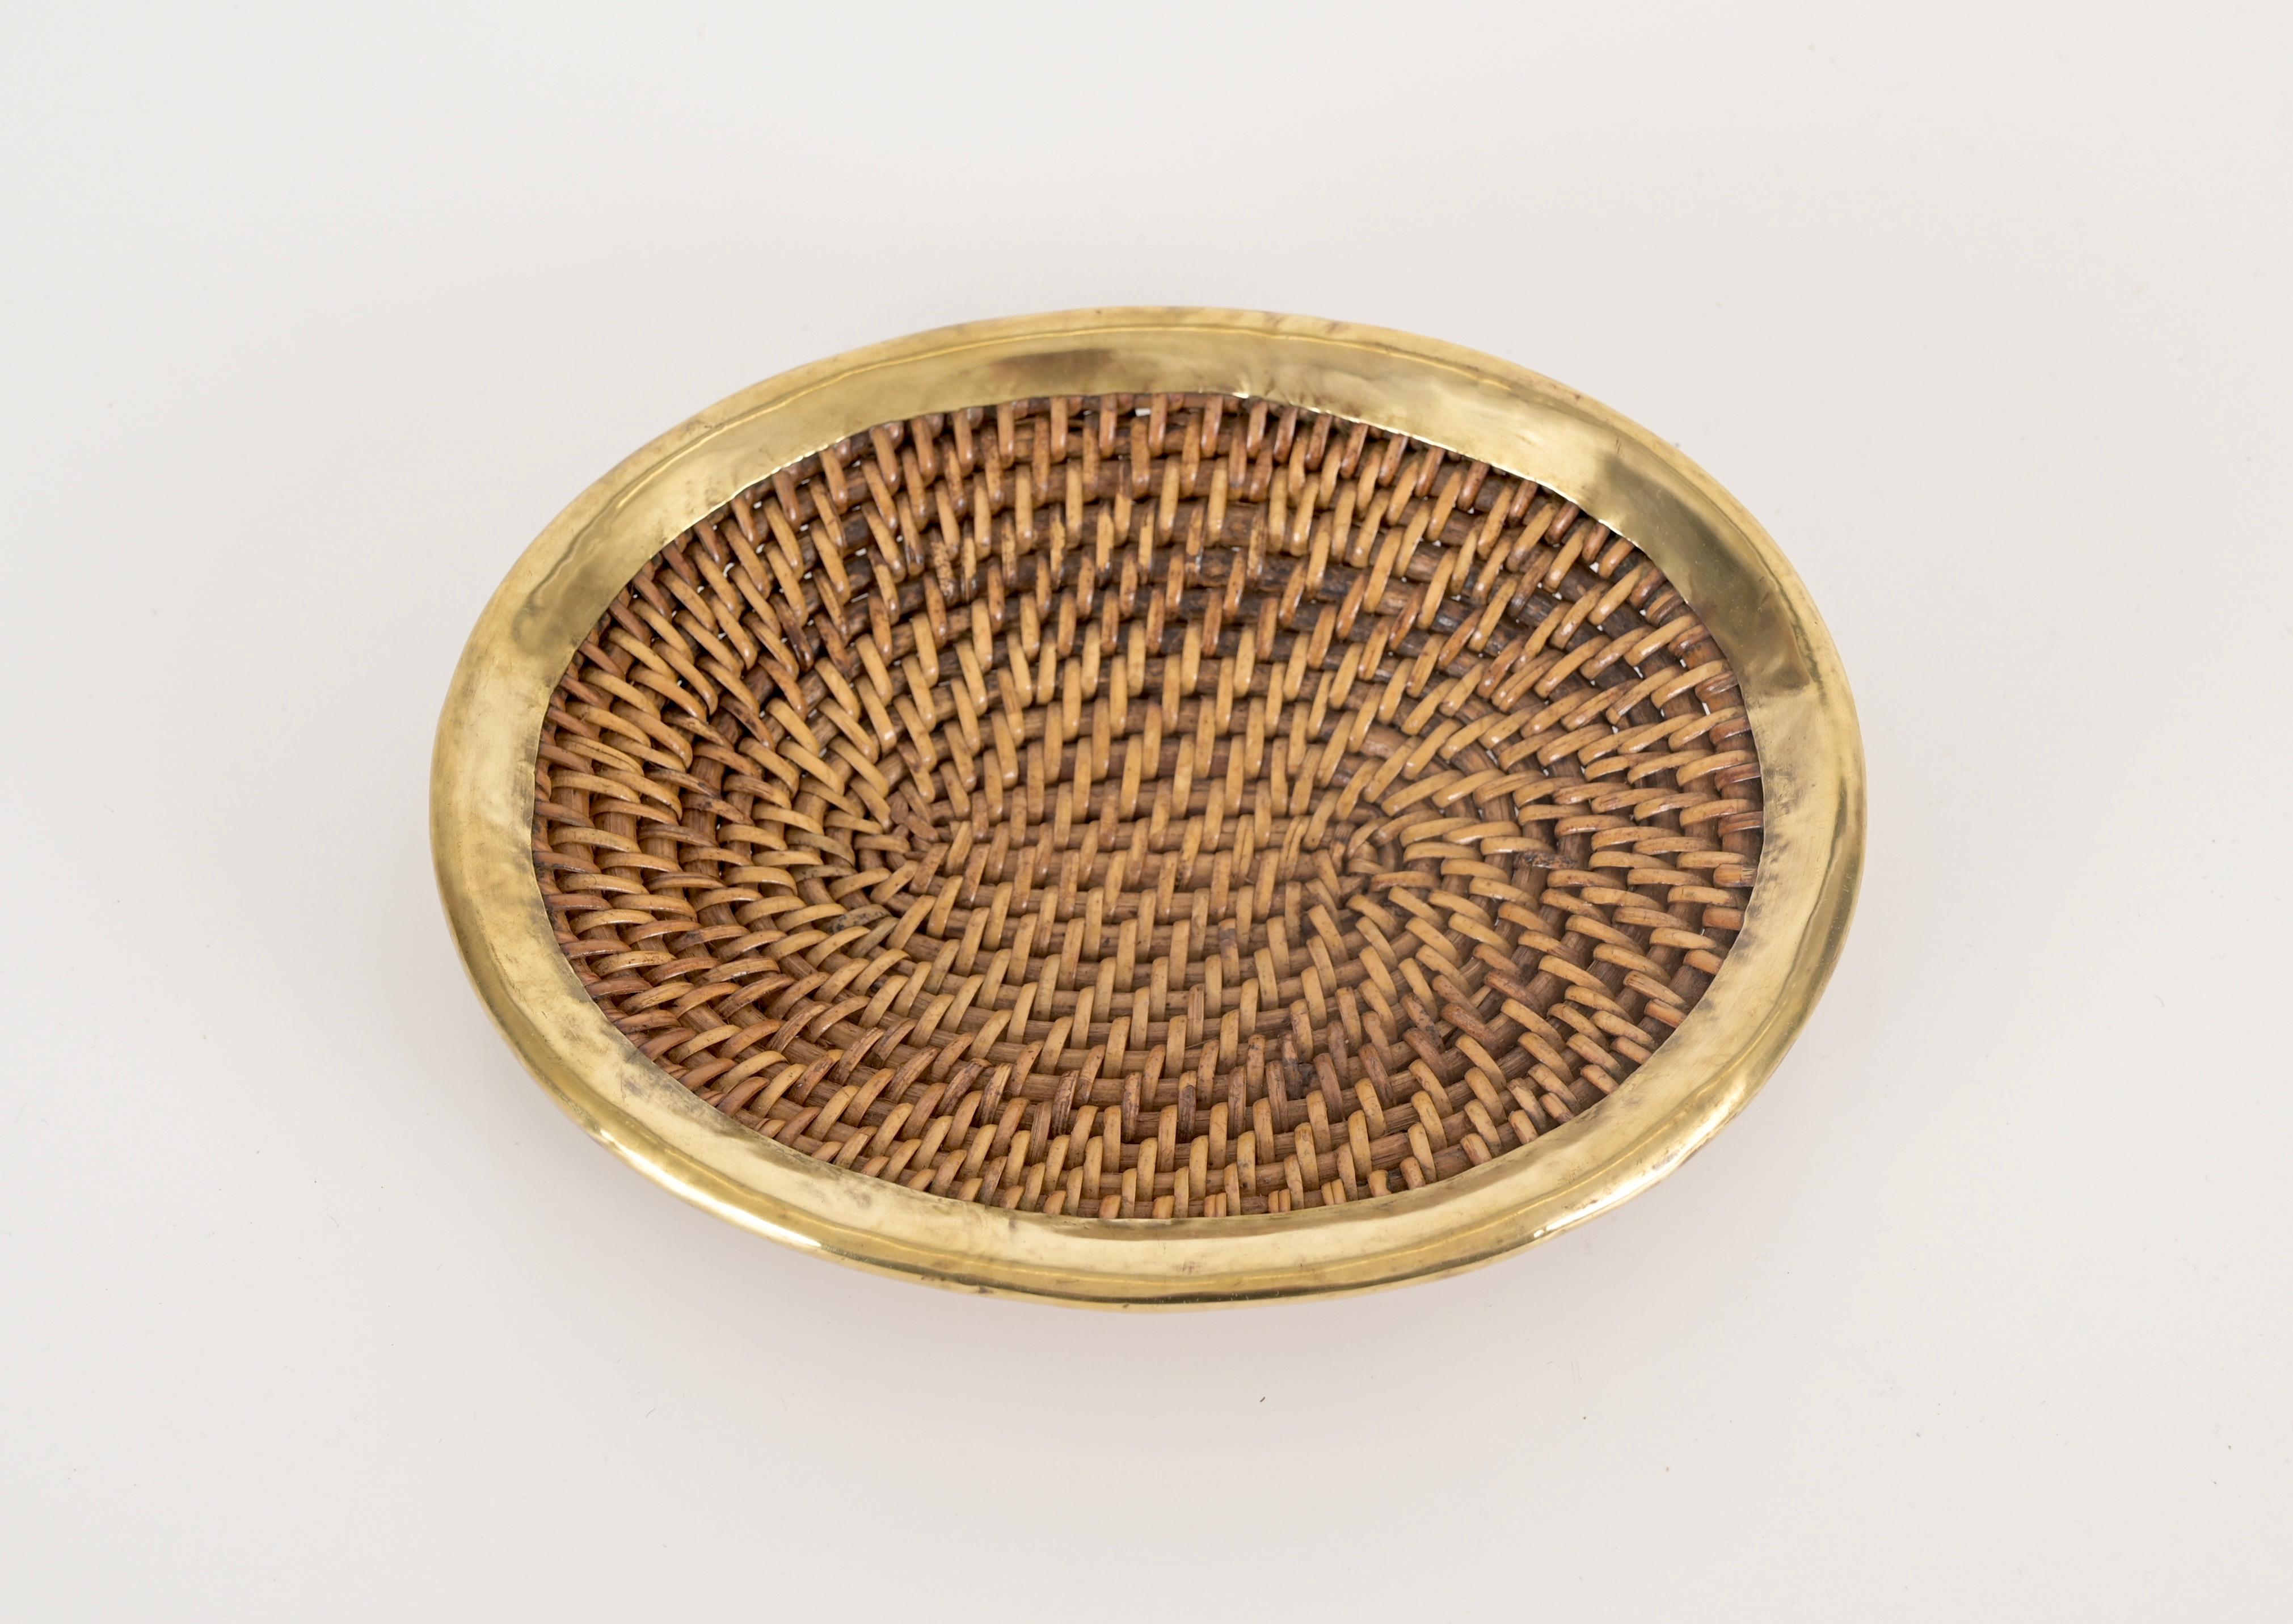 Beautiful vide-poche or decorative bowl fully made in woven rattan wicker and brass. This elegant French Riviera style object was made in Italy during the 1970s.

This stunning vide-poche has an oval-shaped tray made in woven rattan wicker and